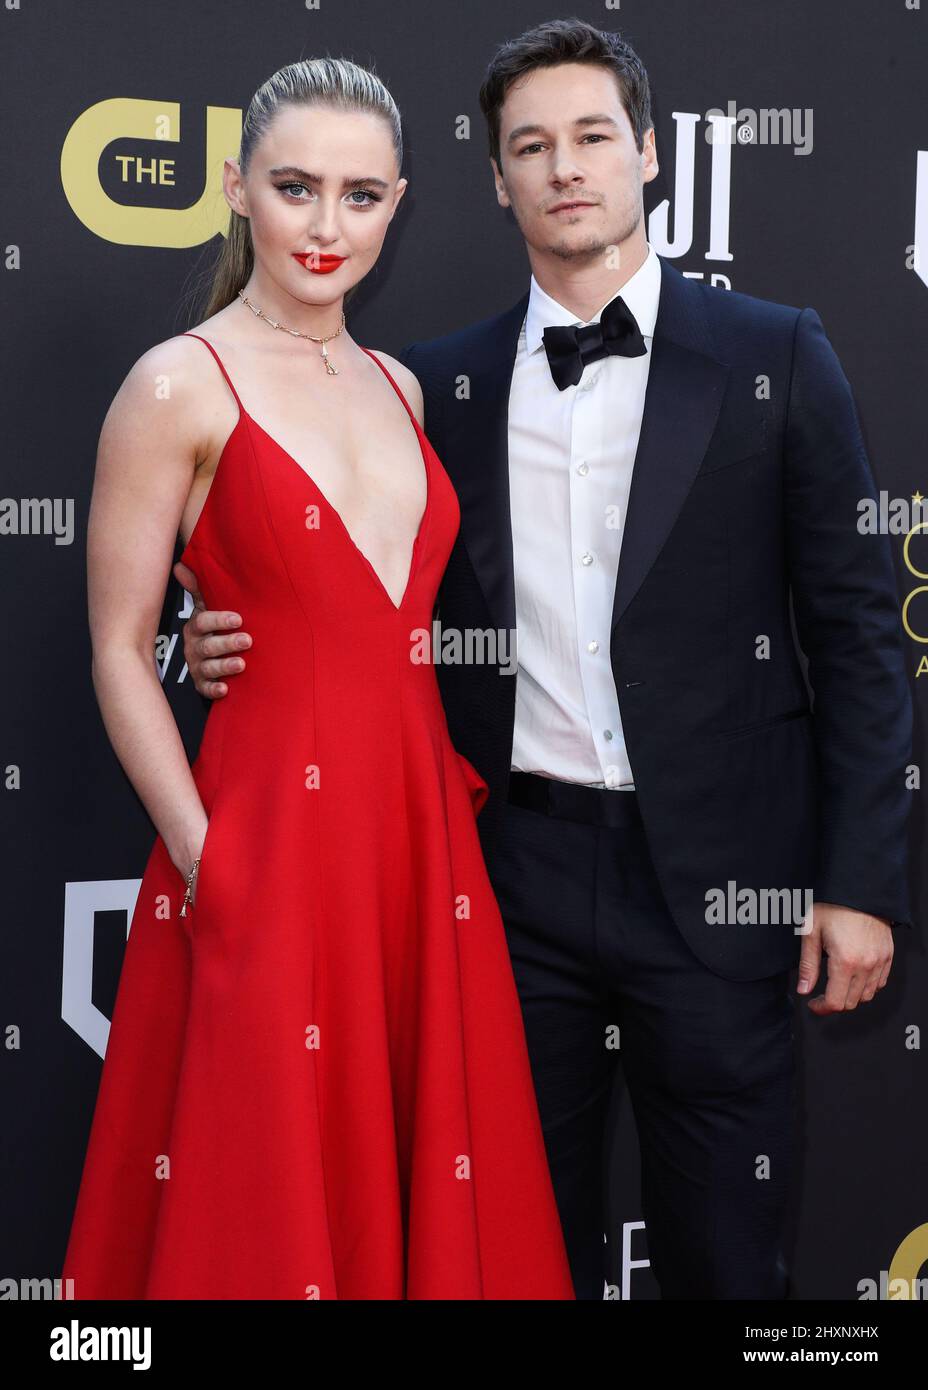 CENTURY CITY, LOS ANGELES, CALIFORNIA, USA - MARCH 13: Kathryn Newton and Kyle Allen arrive at the 27th Annual Critics' Choice Awards held at the Fairmont Century Plaza Hotel on March 13, 2022 in Century City, Los Angeles, California, United States. (Photo by Xavier Collin/Image Press Agency) Stock Photo